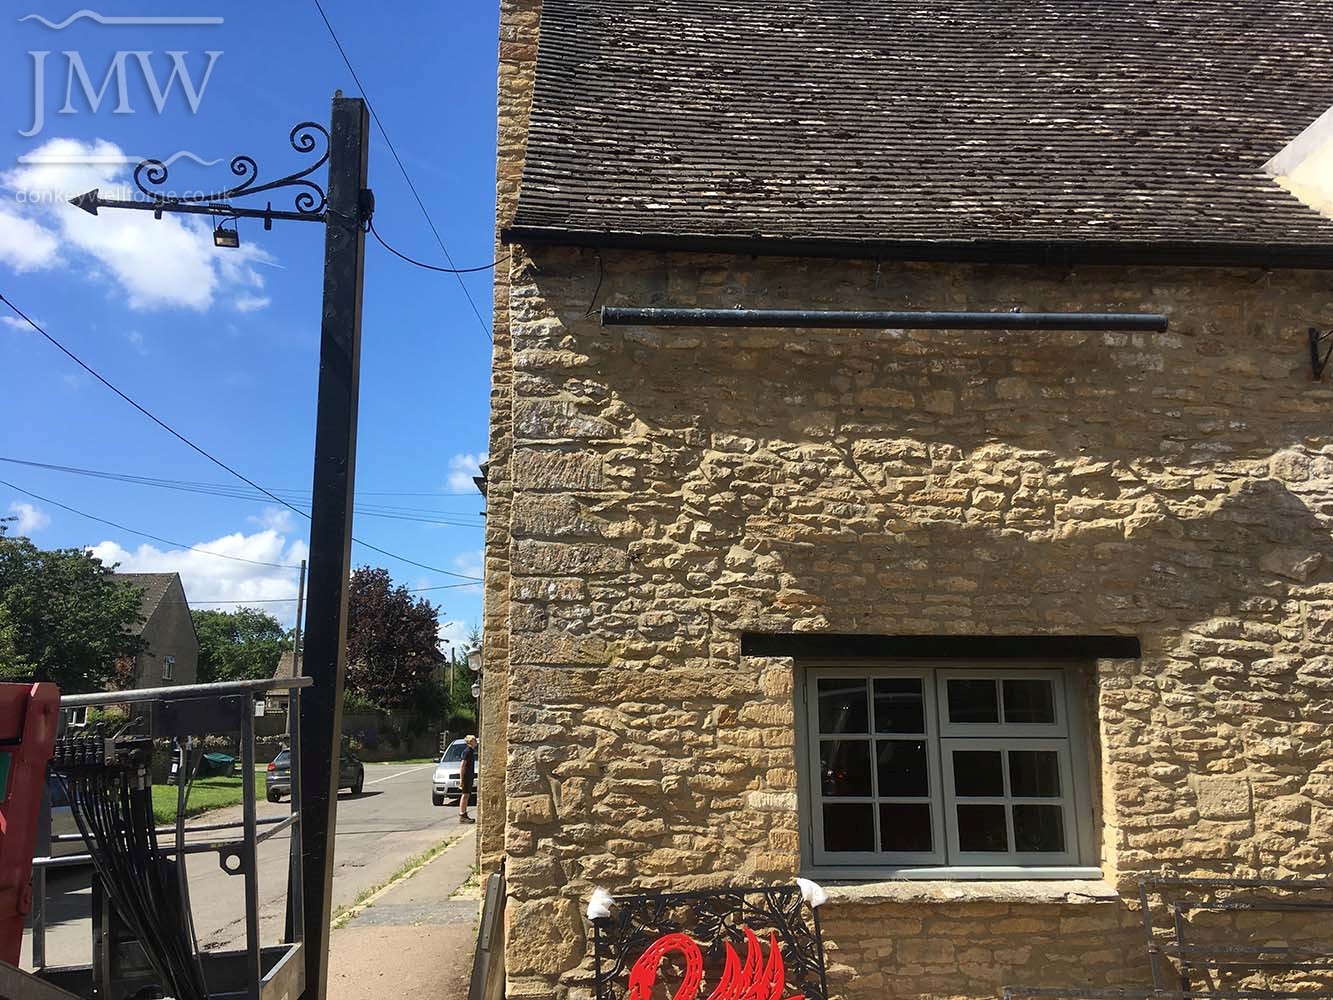 before-swan-signage-metalwork-cotswolds-pub